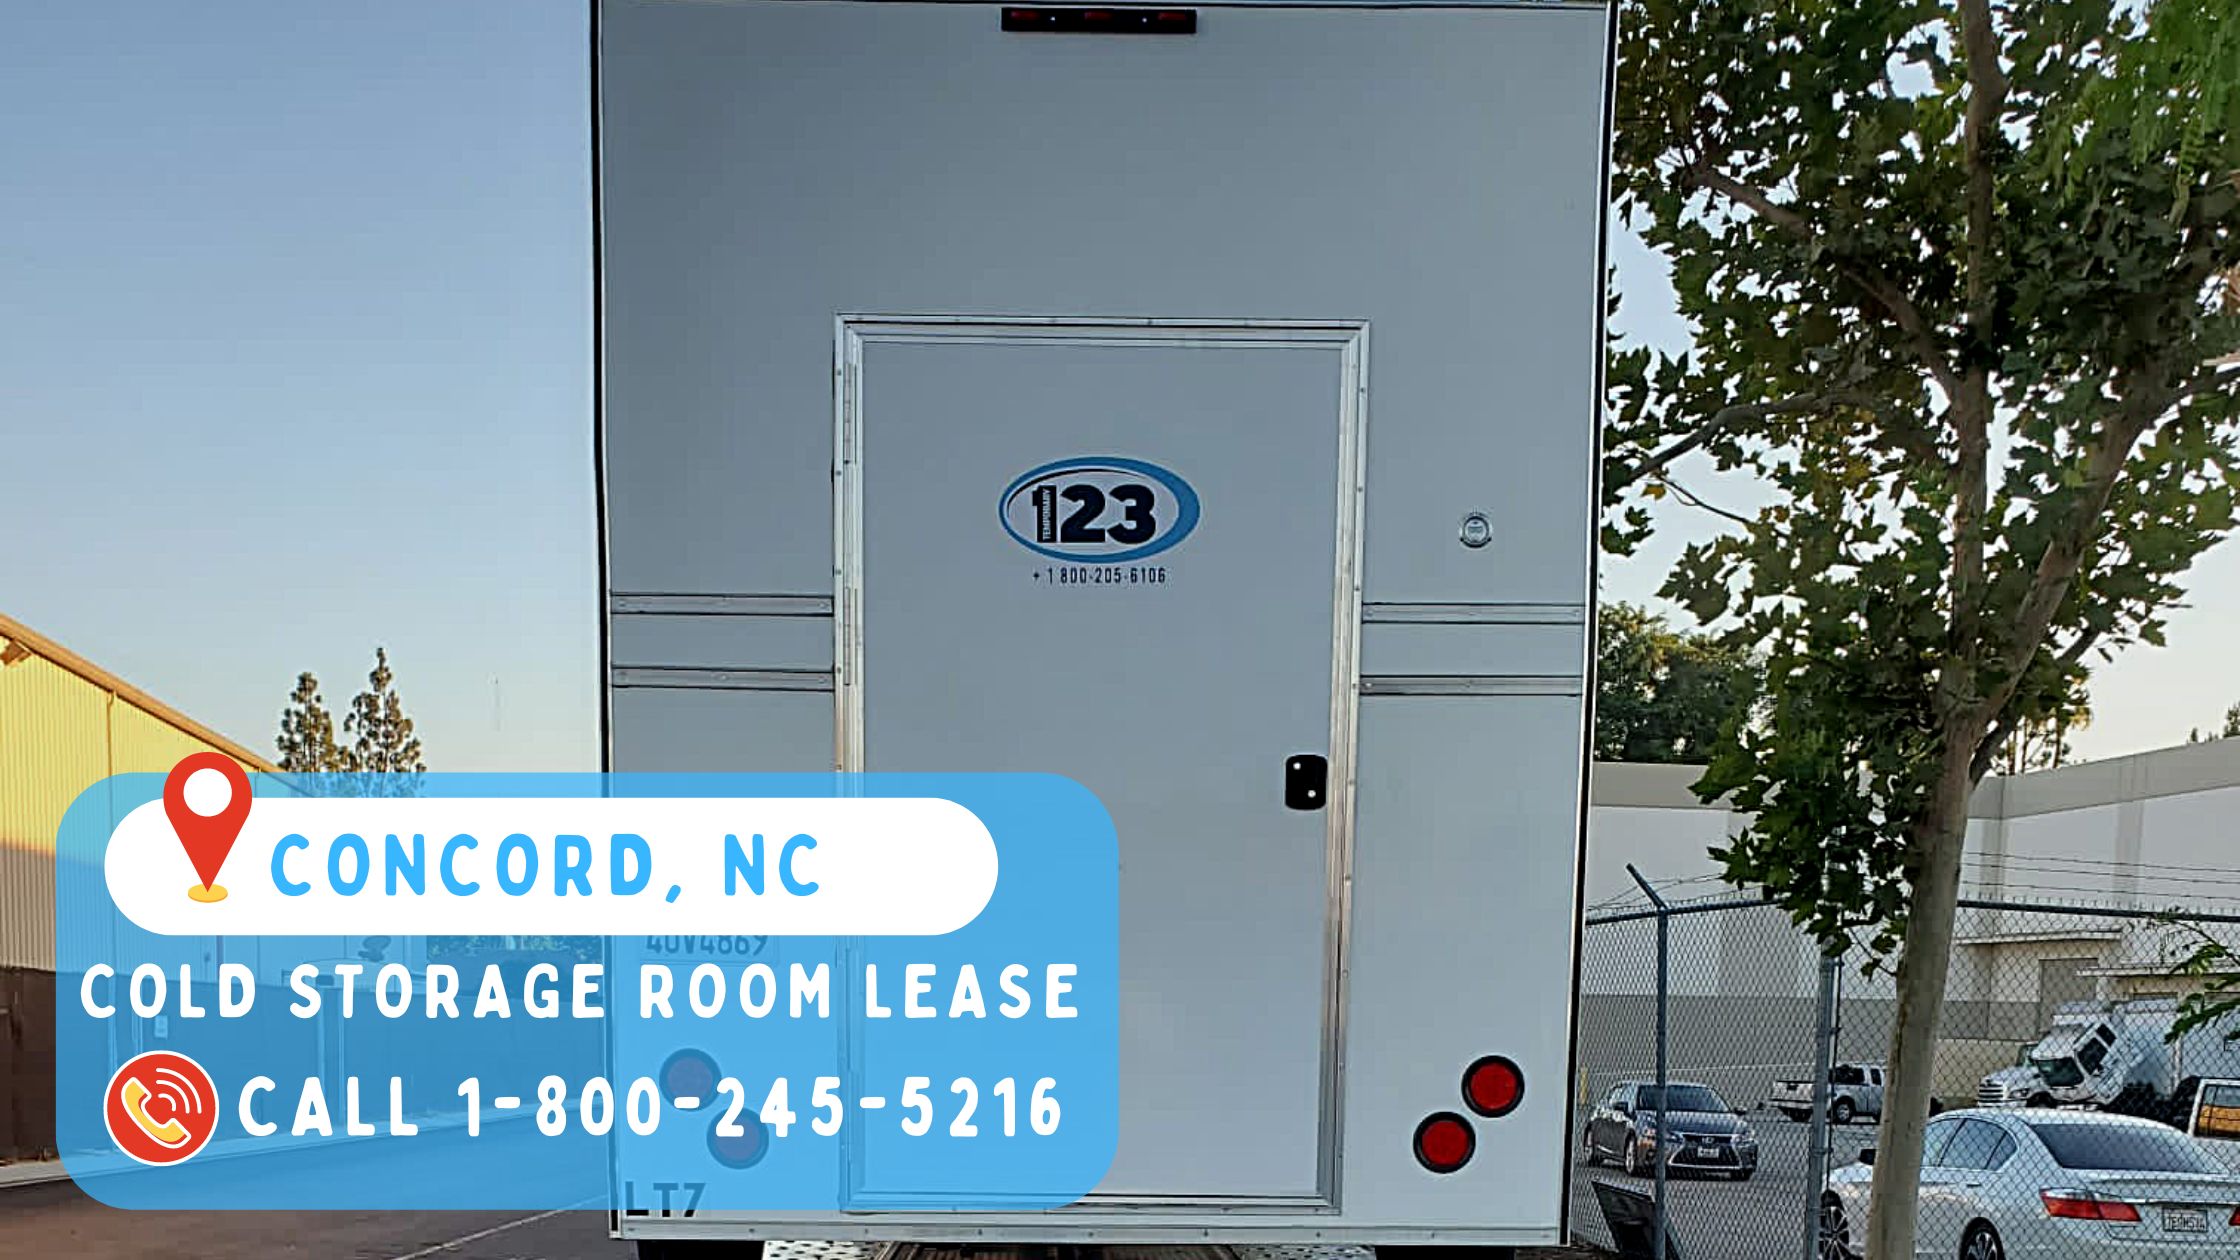 Cold Storage Room Lease in Concord